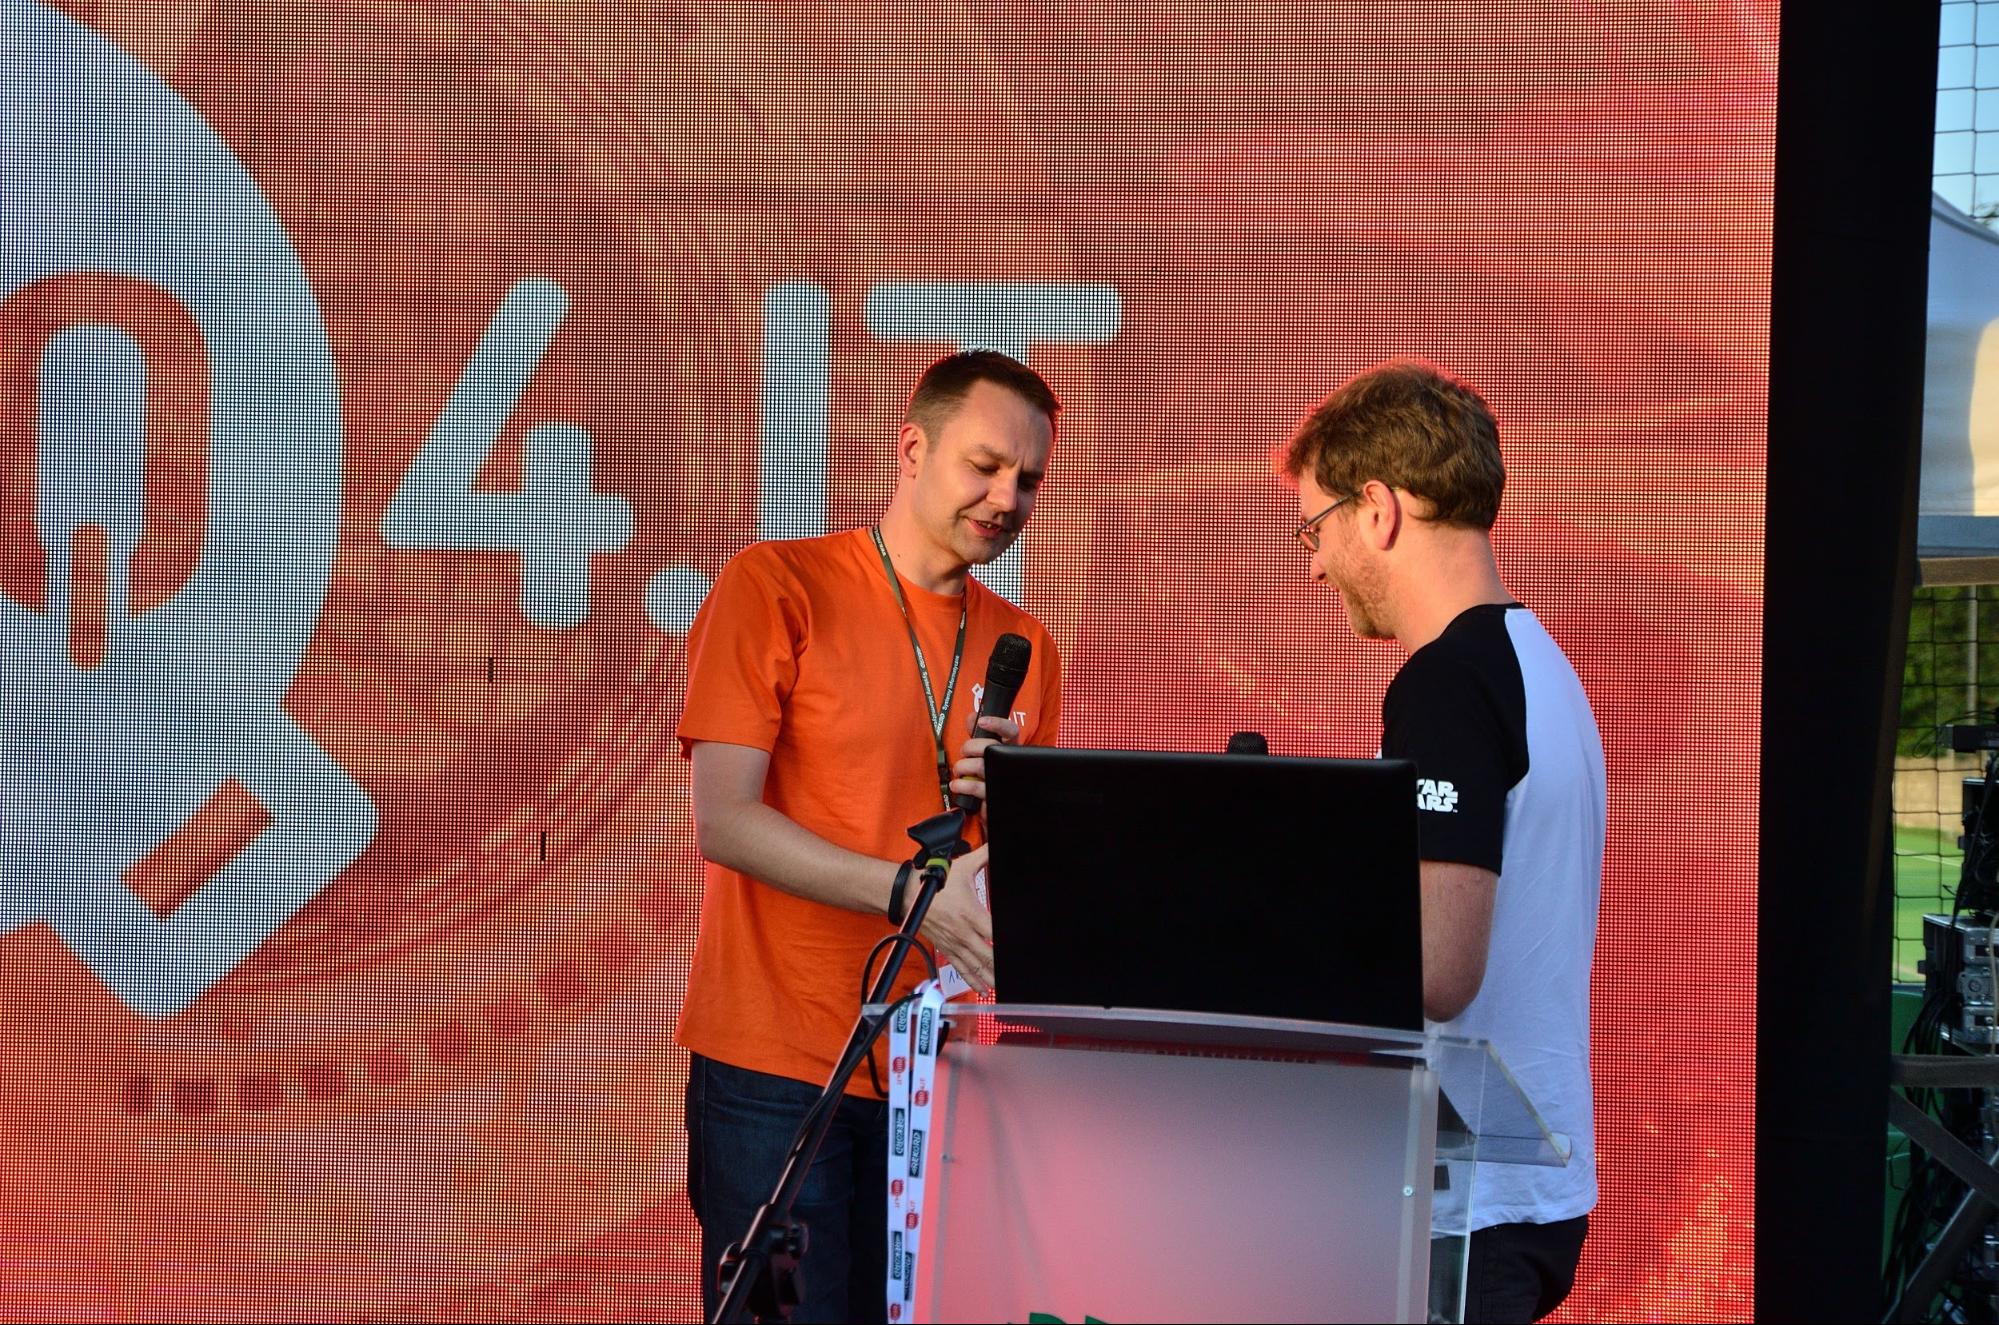 Thanks to Piotr Stapp for giving the second speech during bbq4.it (Photo Credit: Paweł Mazurczak)